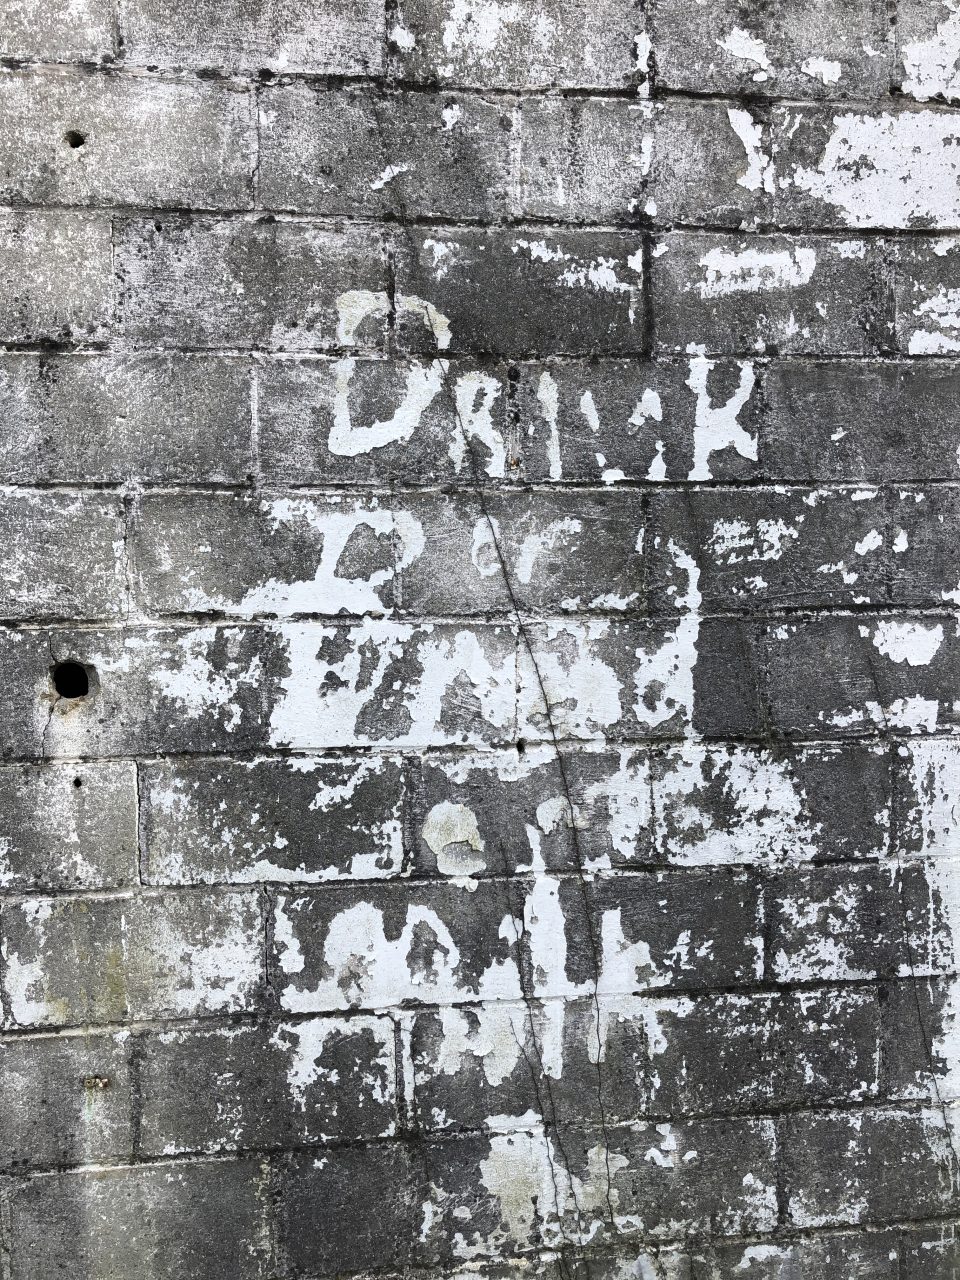 A fading old sign on the side of a former retail building in Anniston, Alabama.